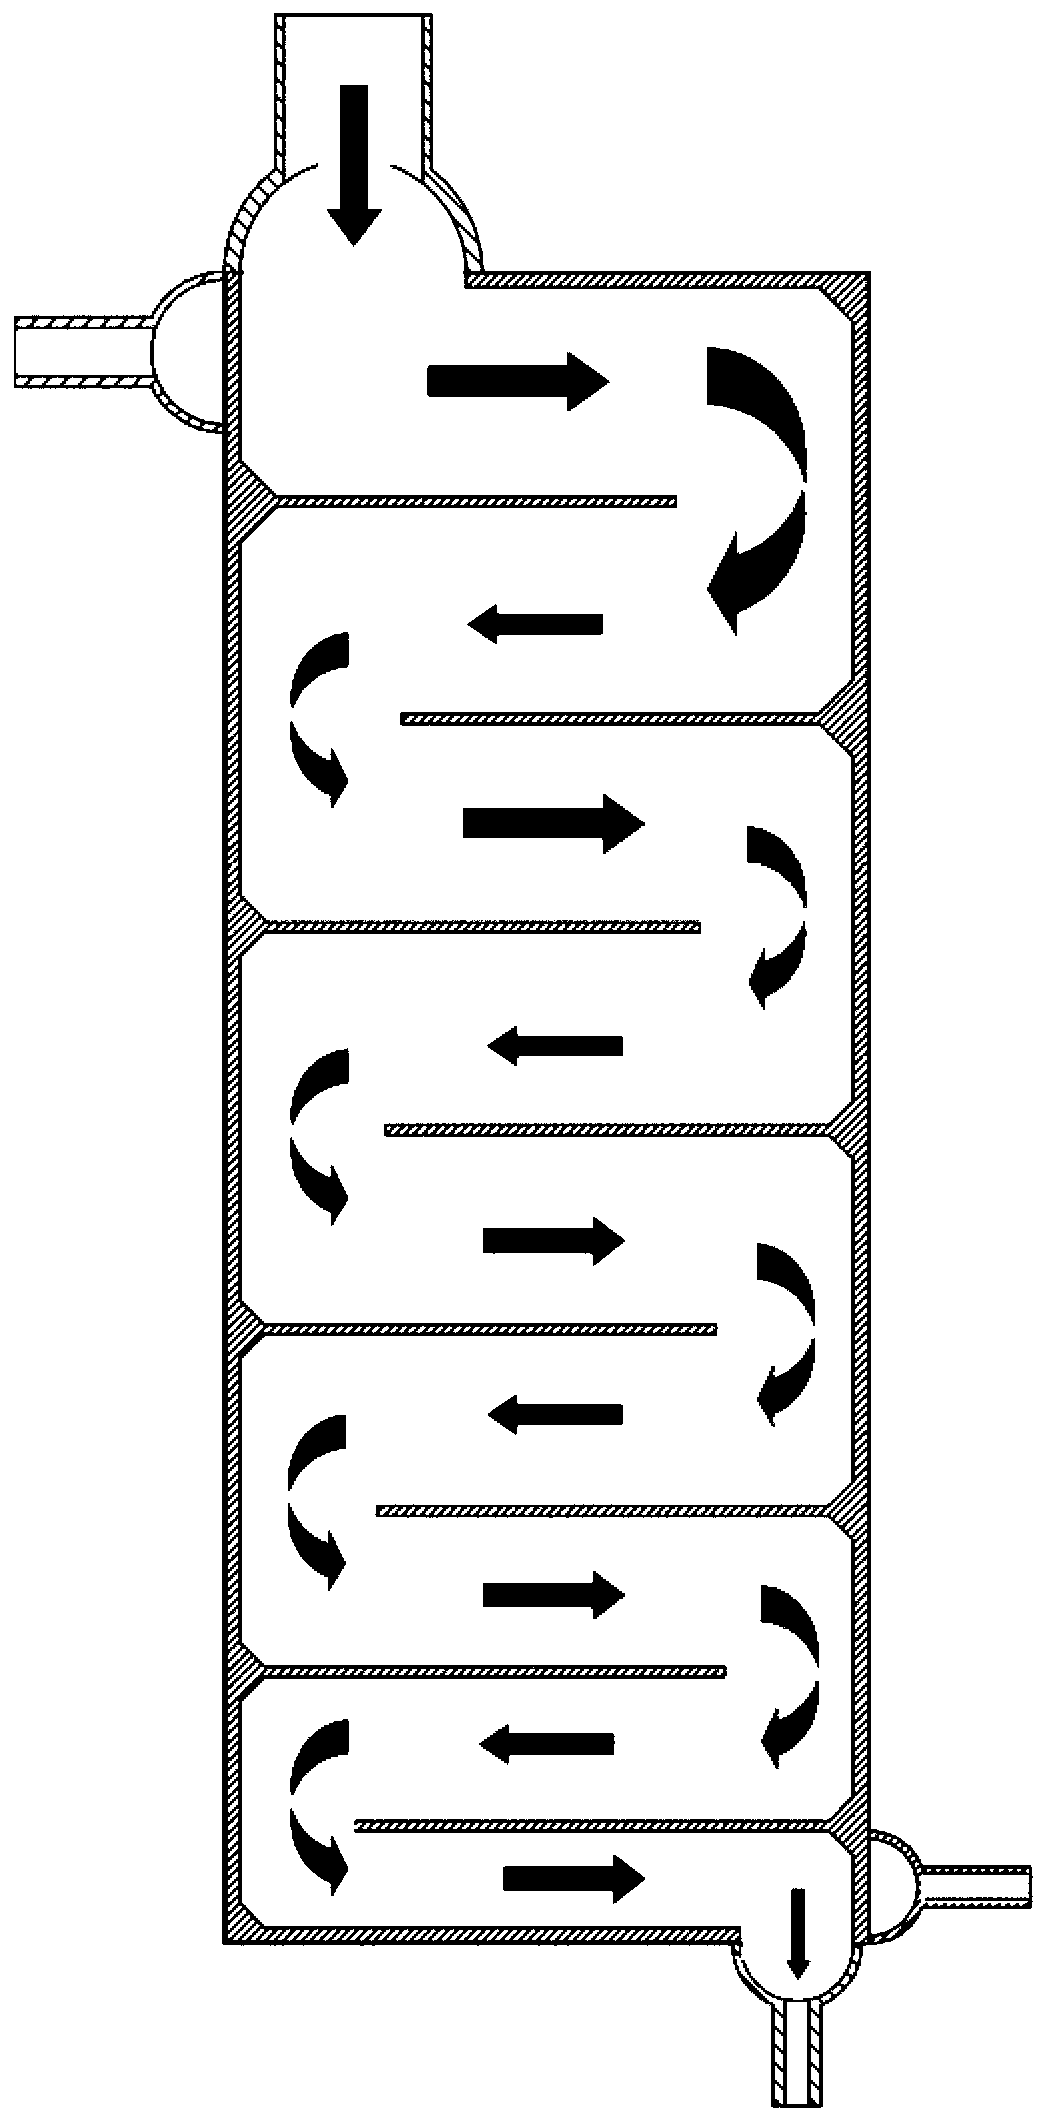 Plate-fin type heat exchanger with fluid being flowing back and forth in channel